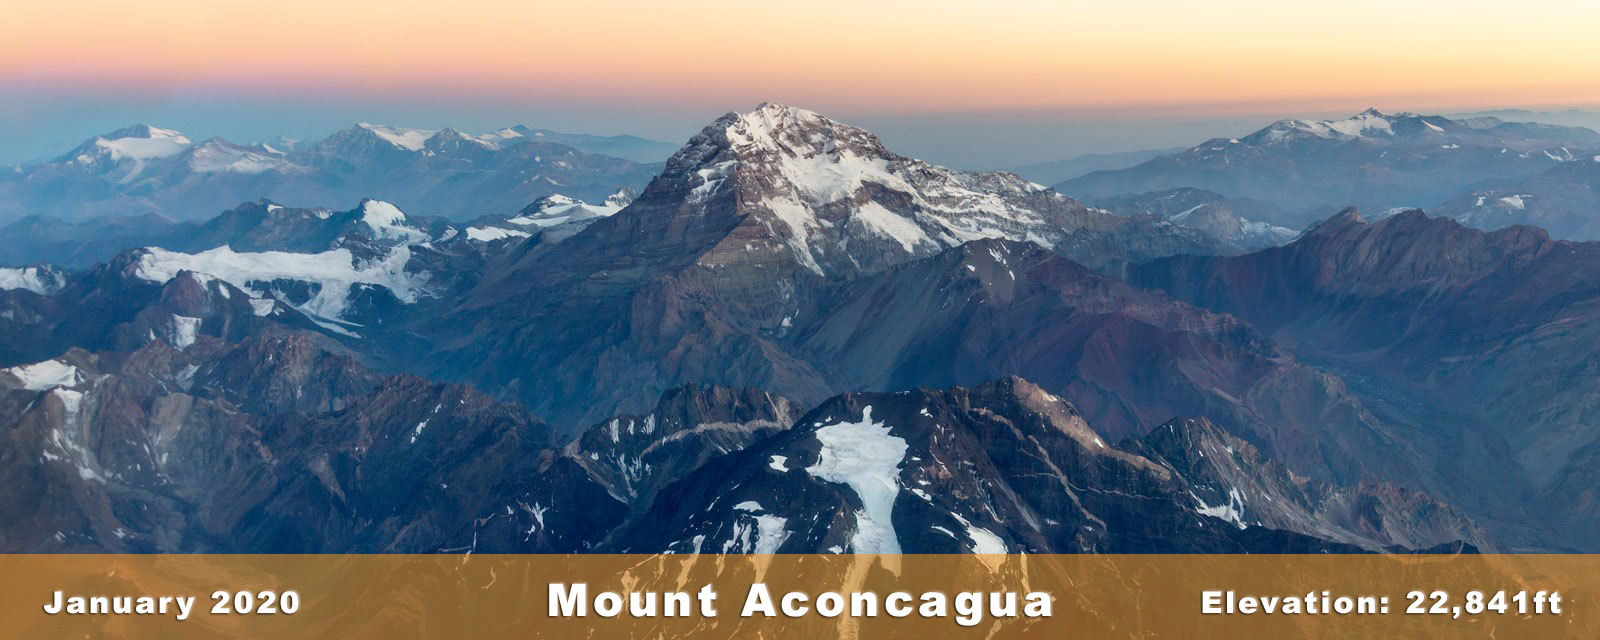 An image of Mount Aconcagua, January 2020